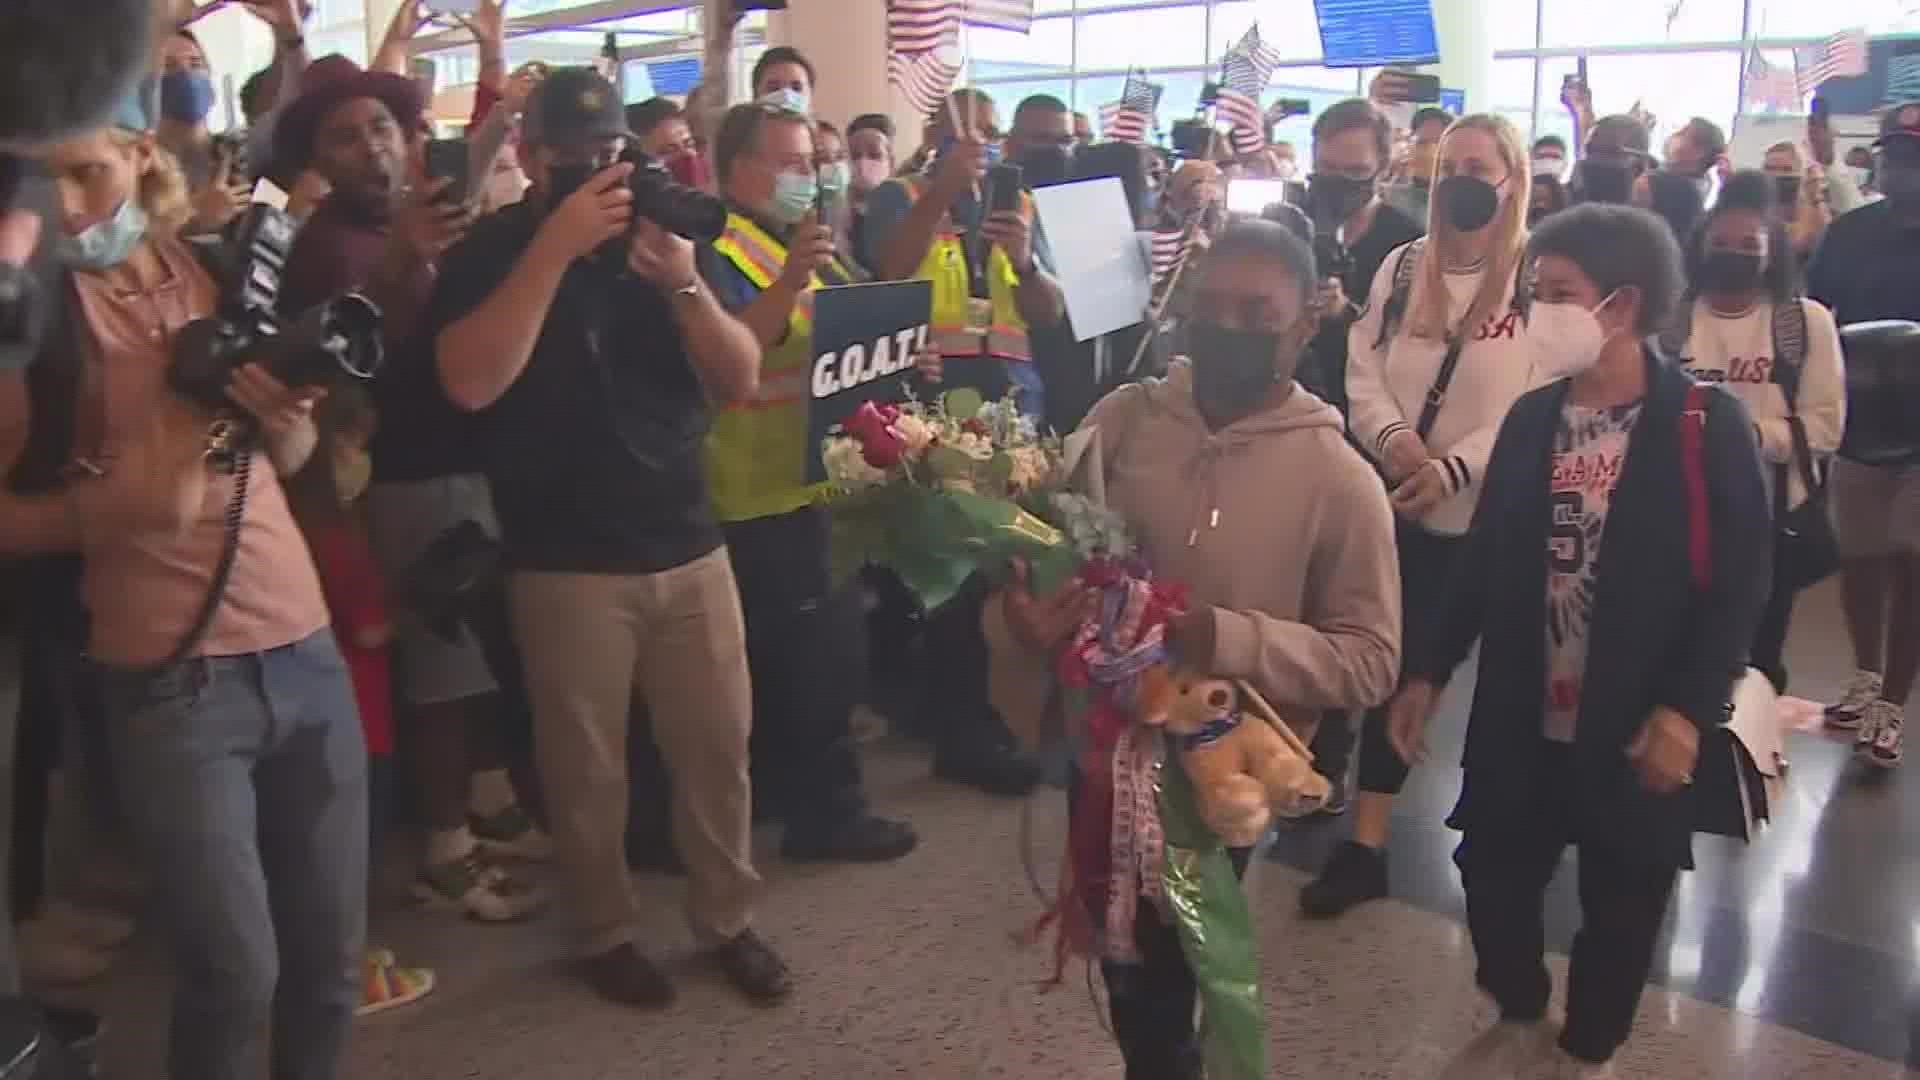 Crowds were at Bush Airport to greet the Olympians as they got off their flight and in Spring as they headed home.